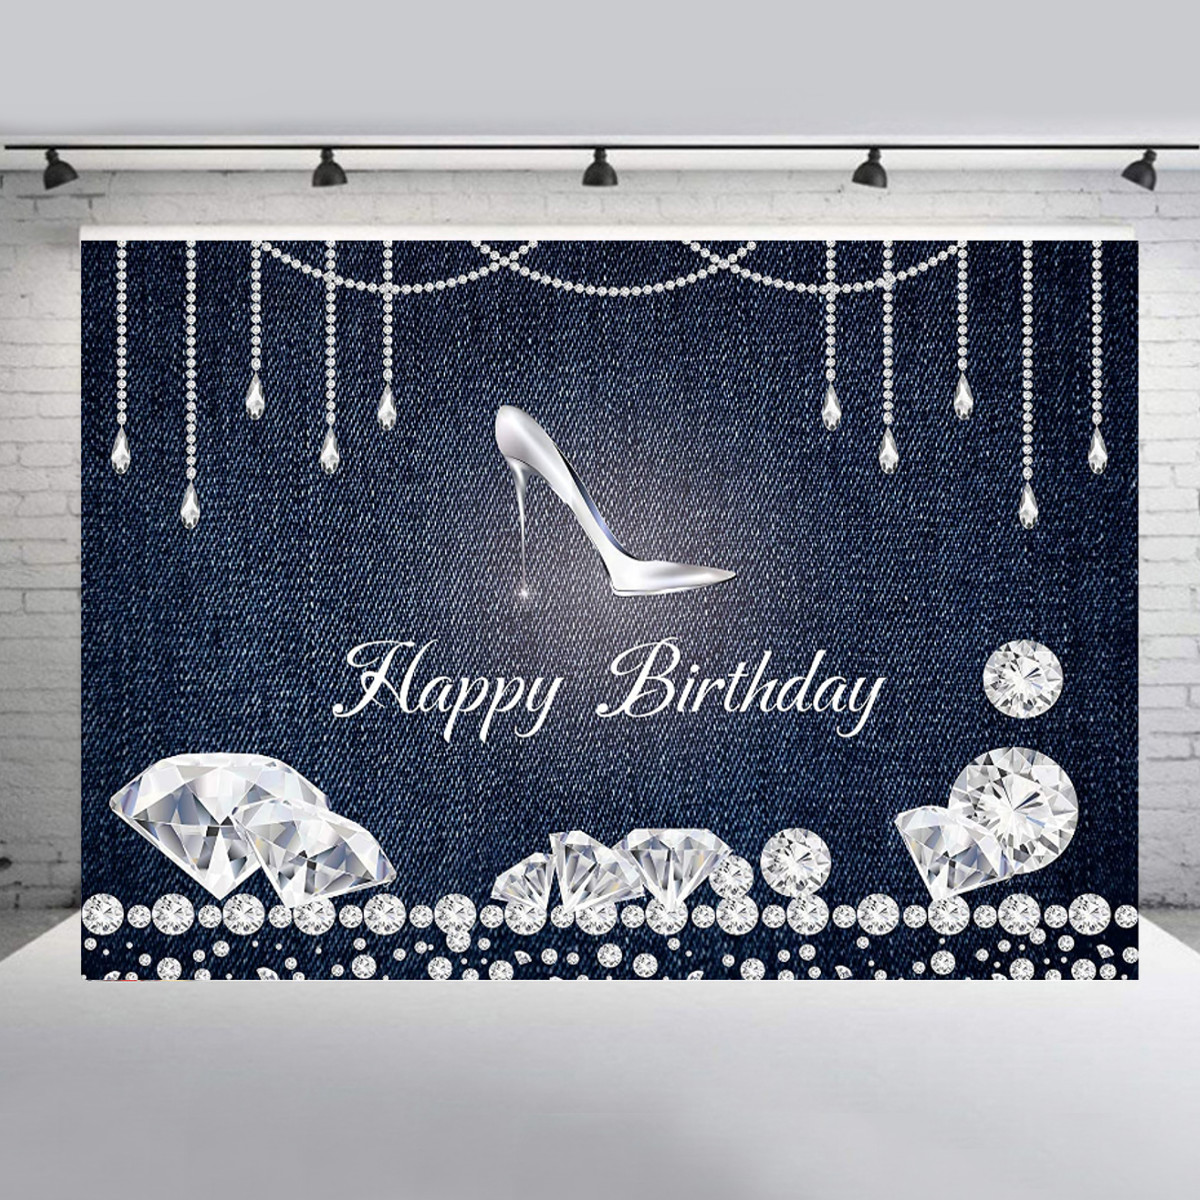 Happy-Birthday-Photography-Backdrop-Photo-Background-Studio-Home-Party-Decor-Props-1821552-8